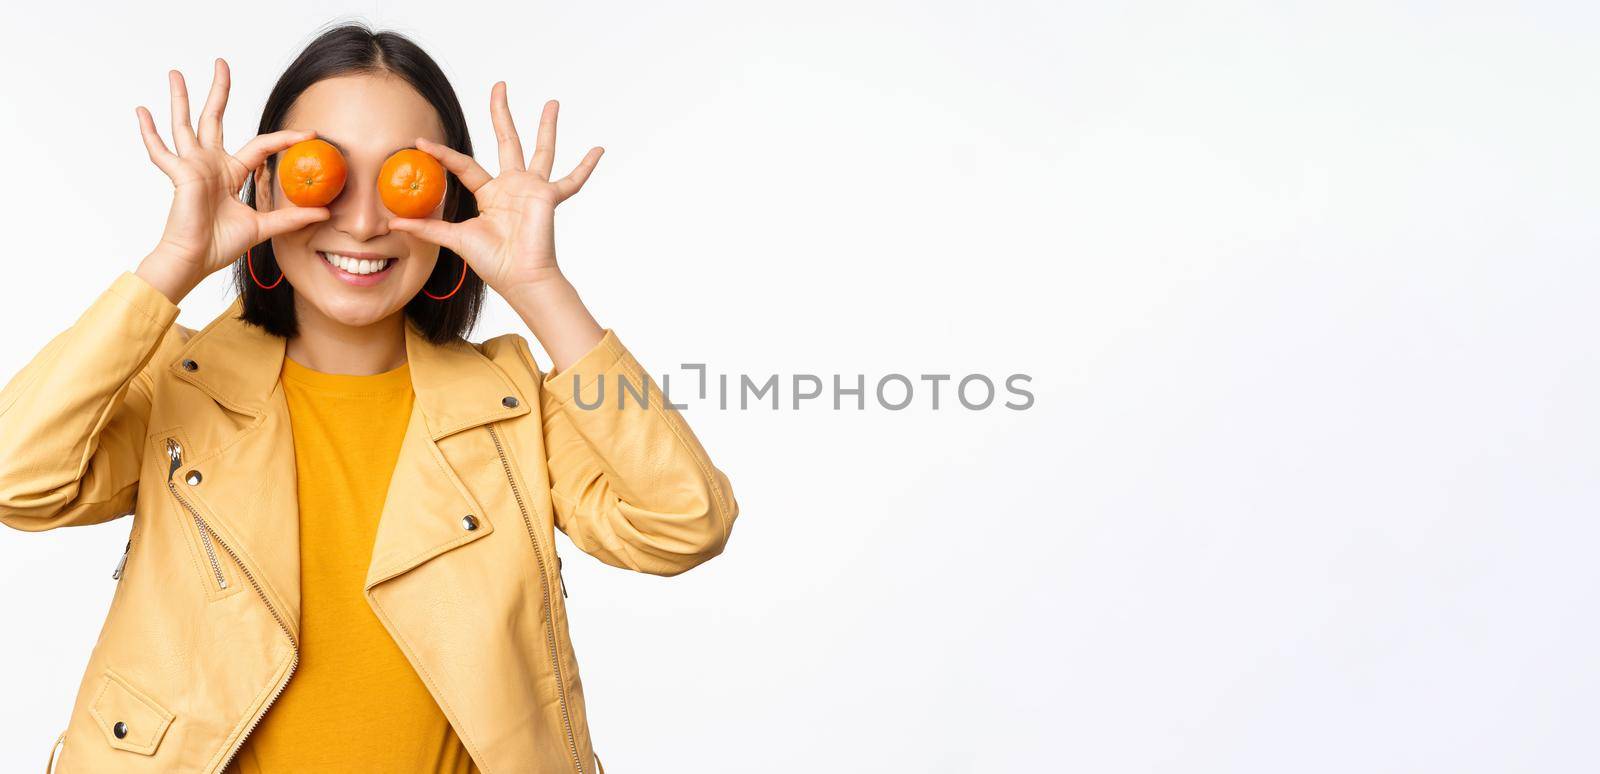 Funny asian girl holding tangerine on eyes and smiling, making playful grimaces, standing over white background. Copy space